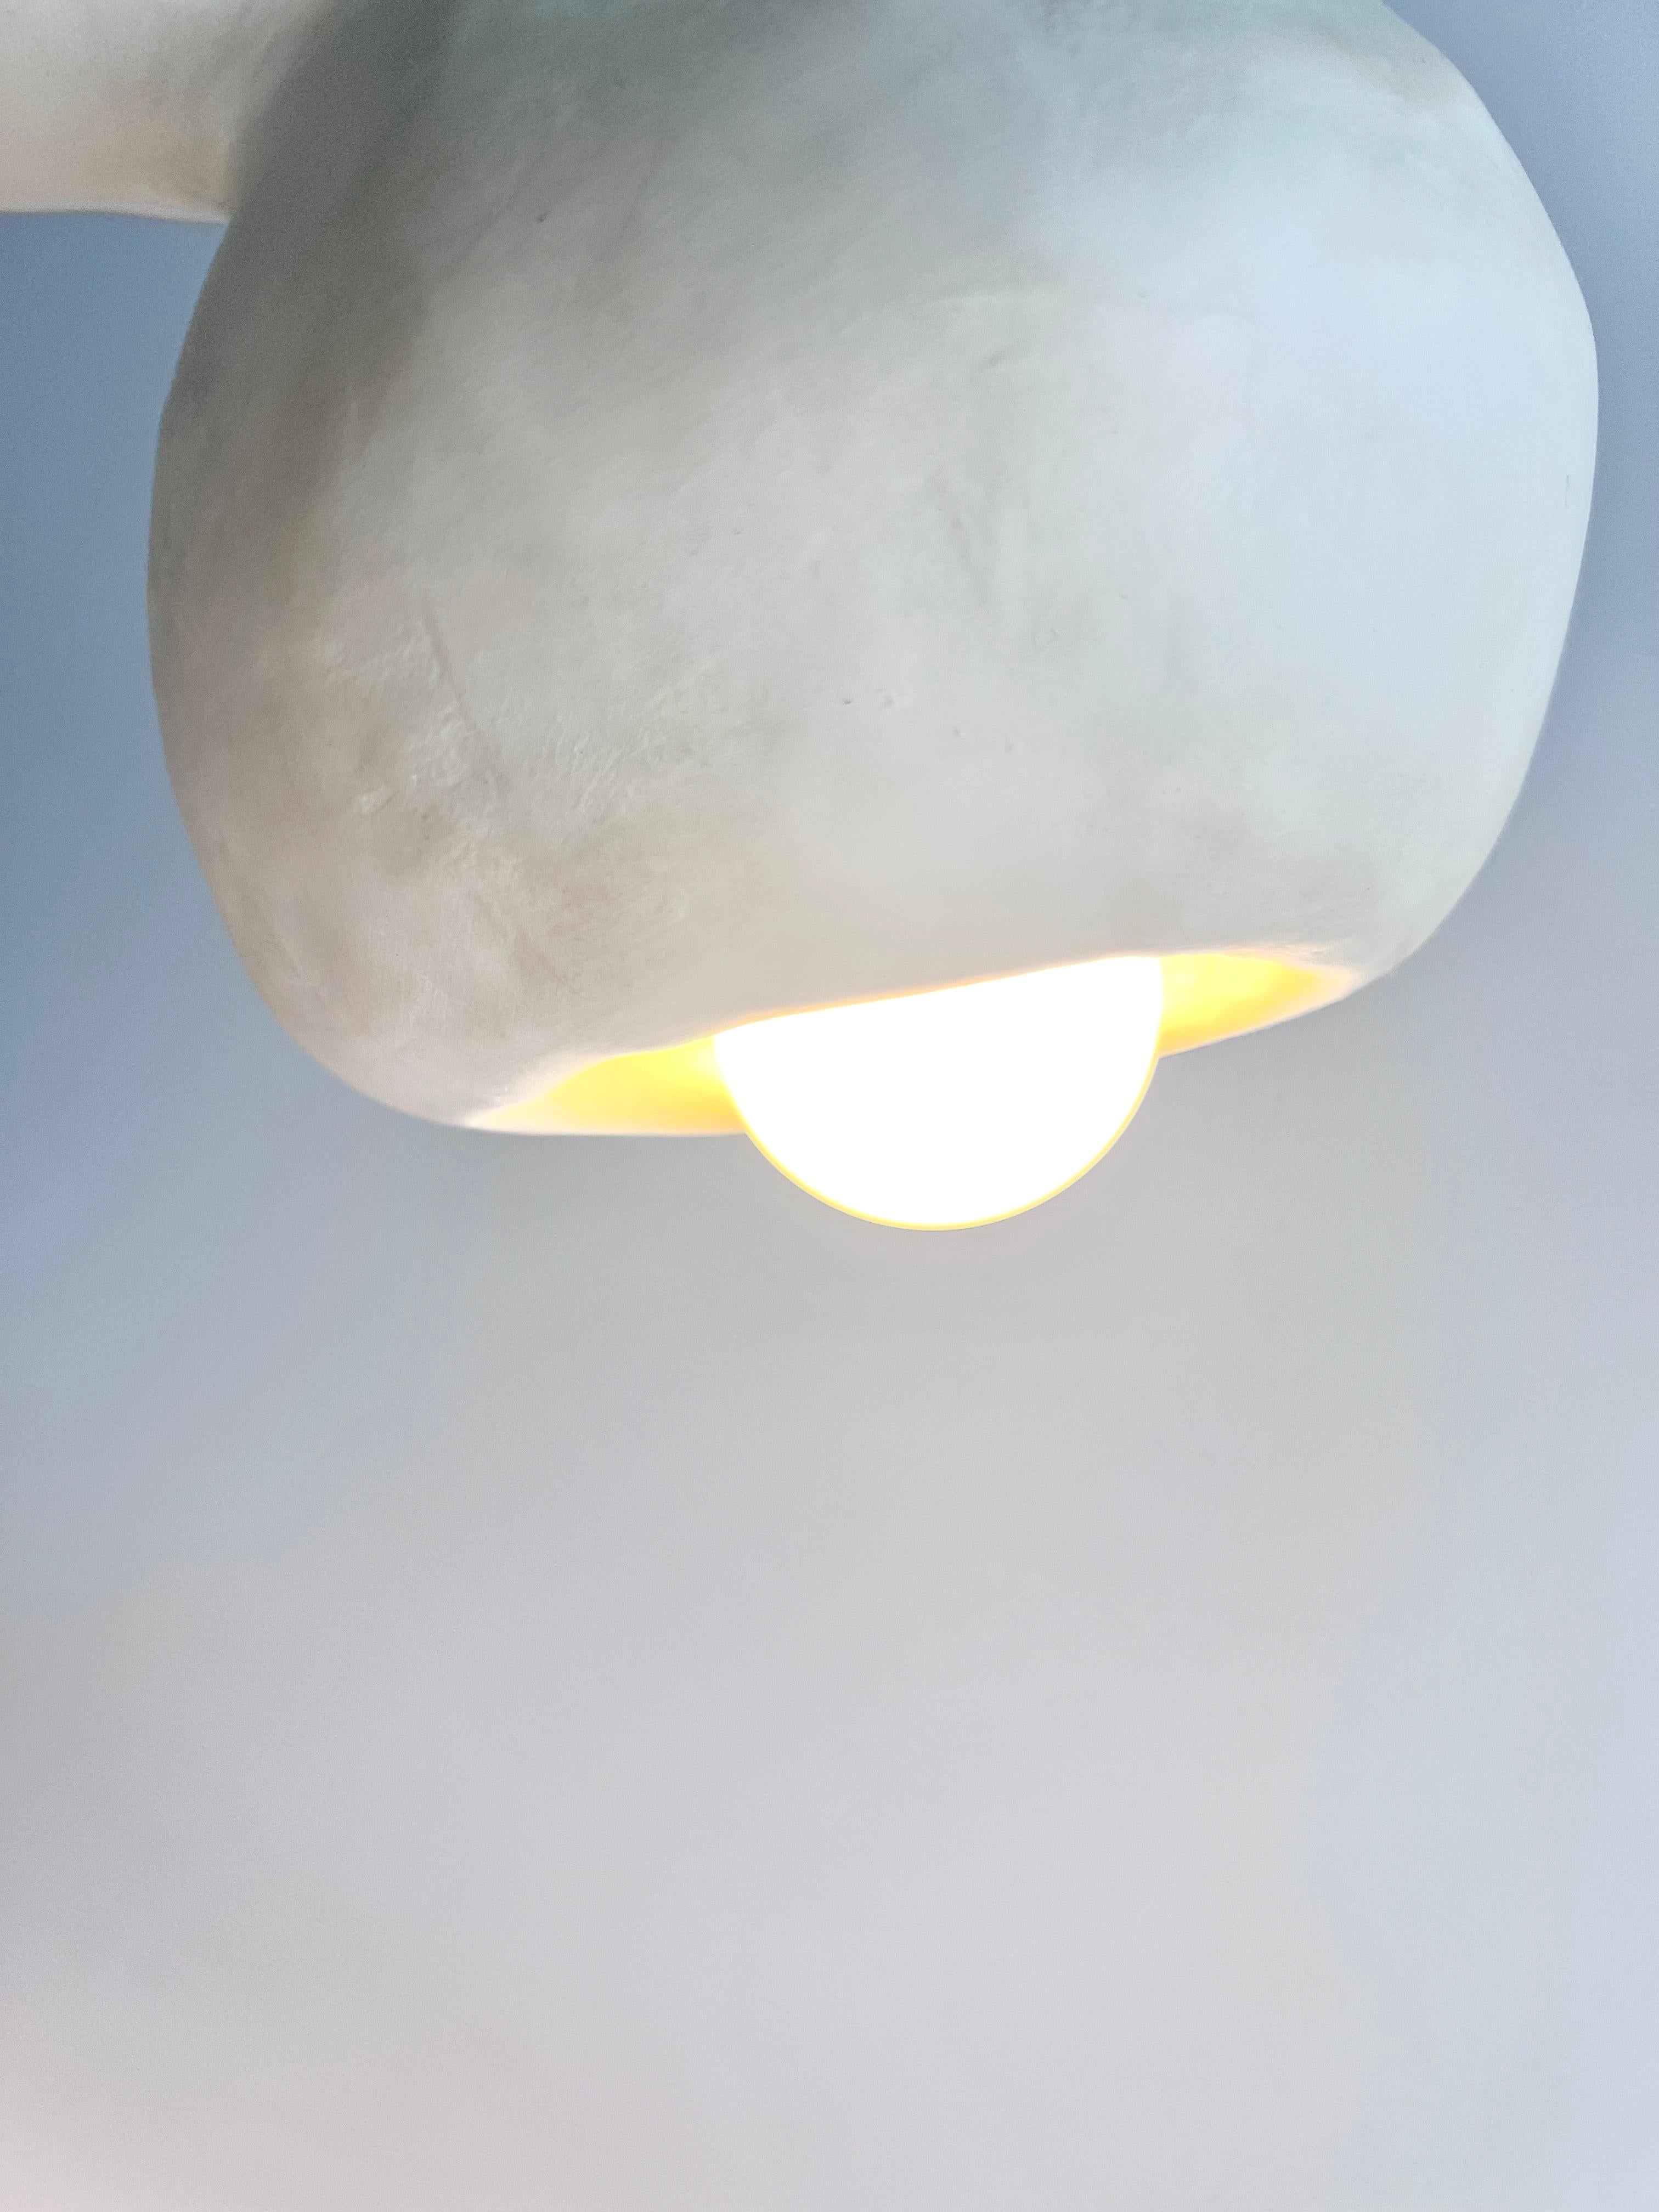 Hand-Carved Biomorphic Line by Studio Chora, Table Lamp, White Lime Plaster, in Stock